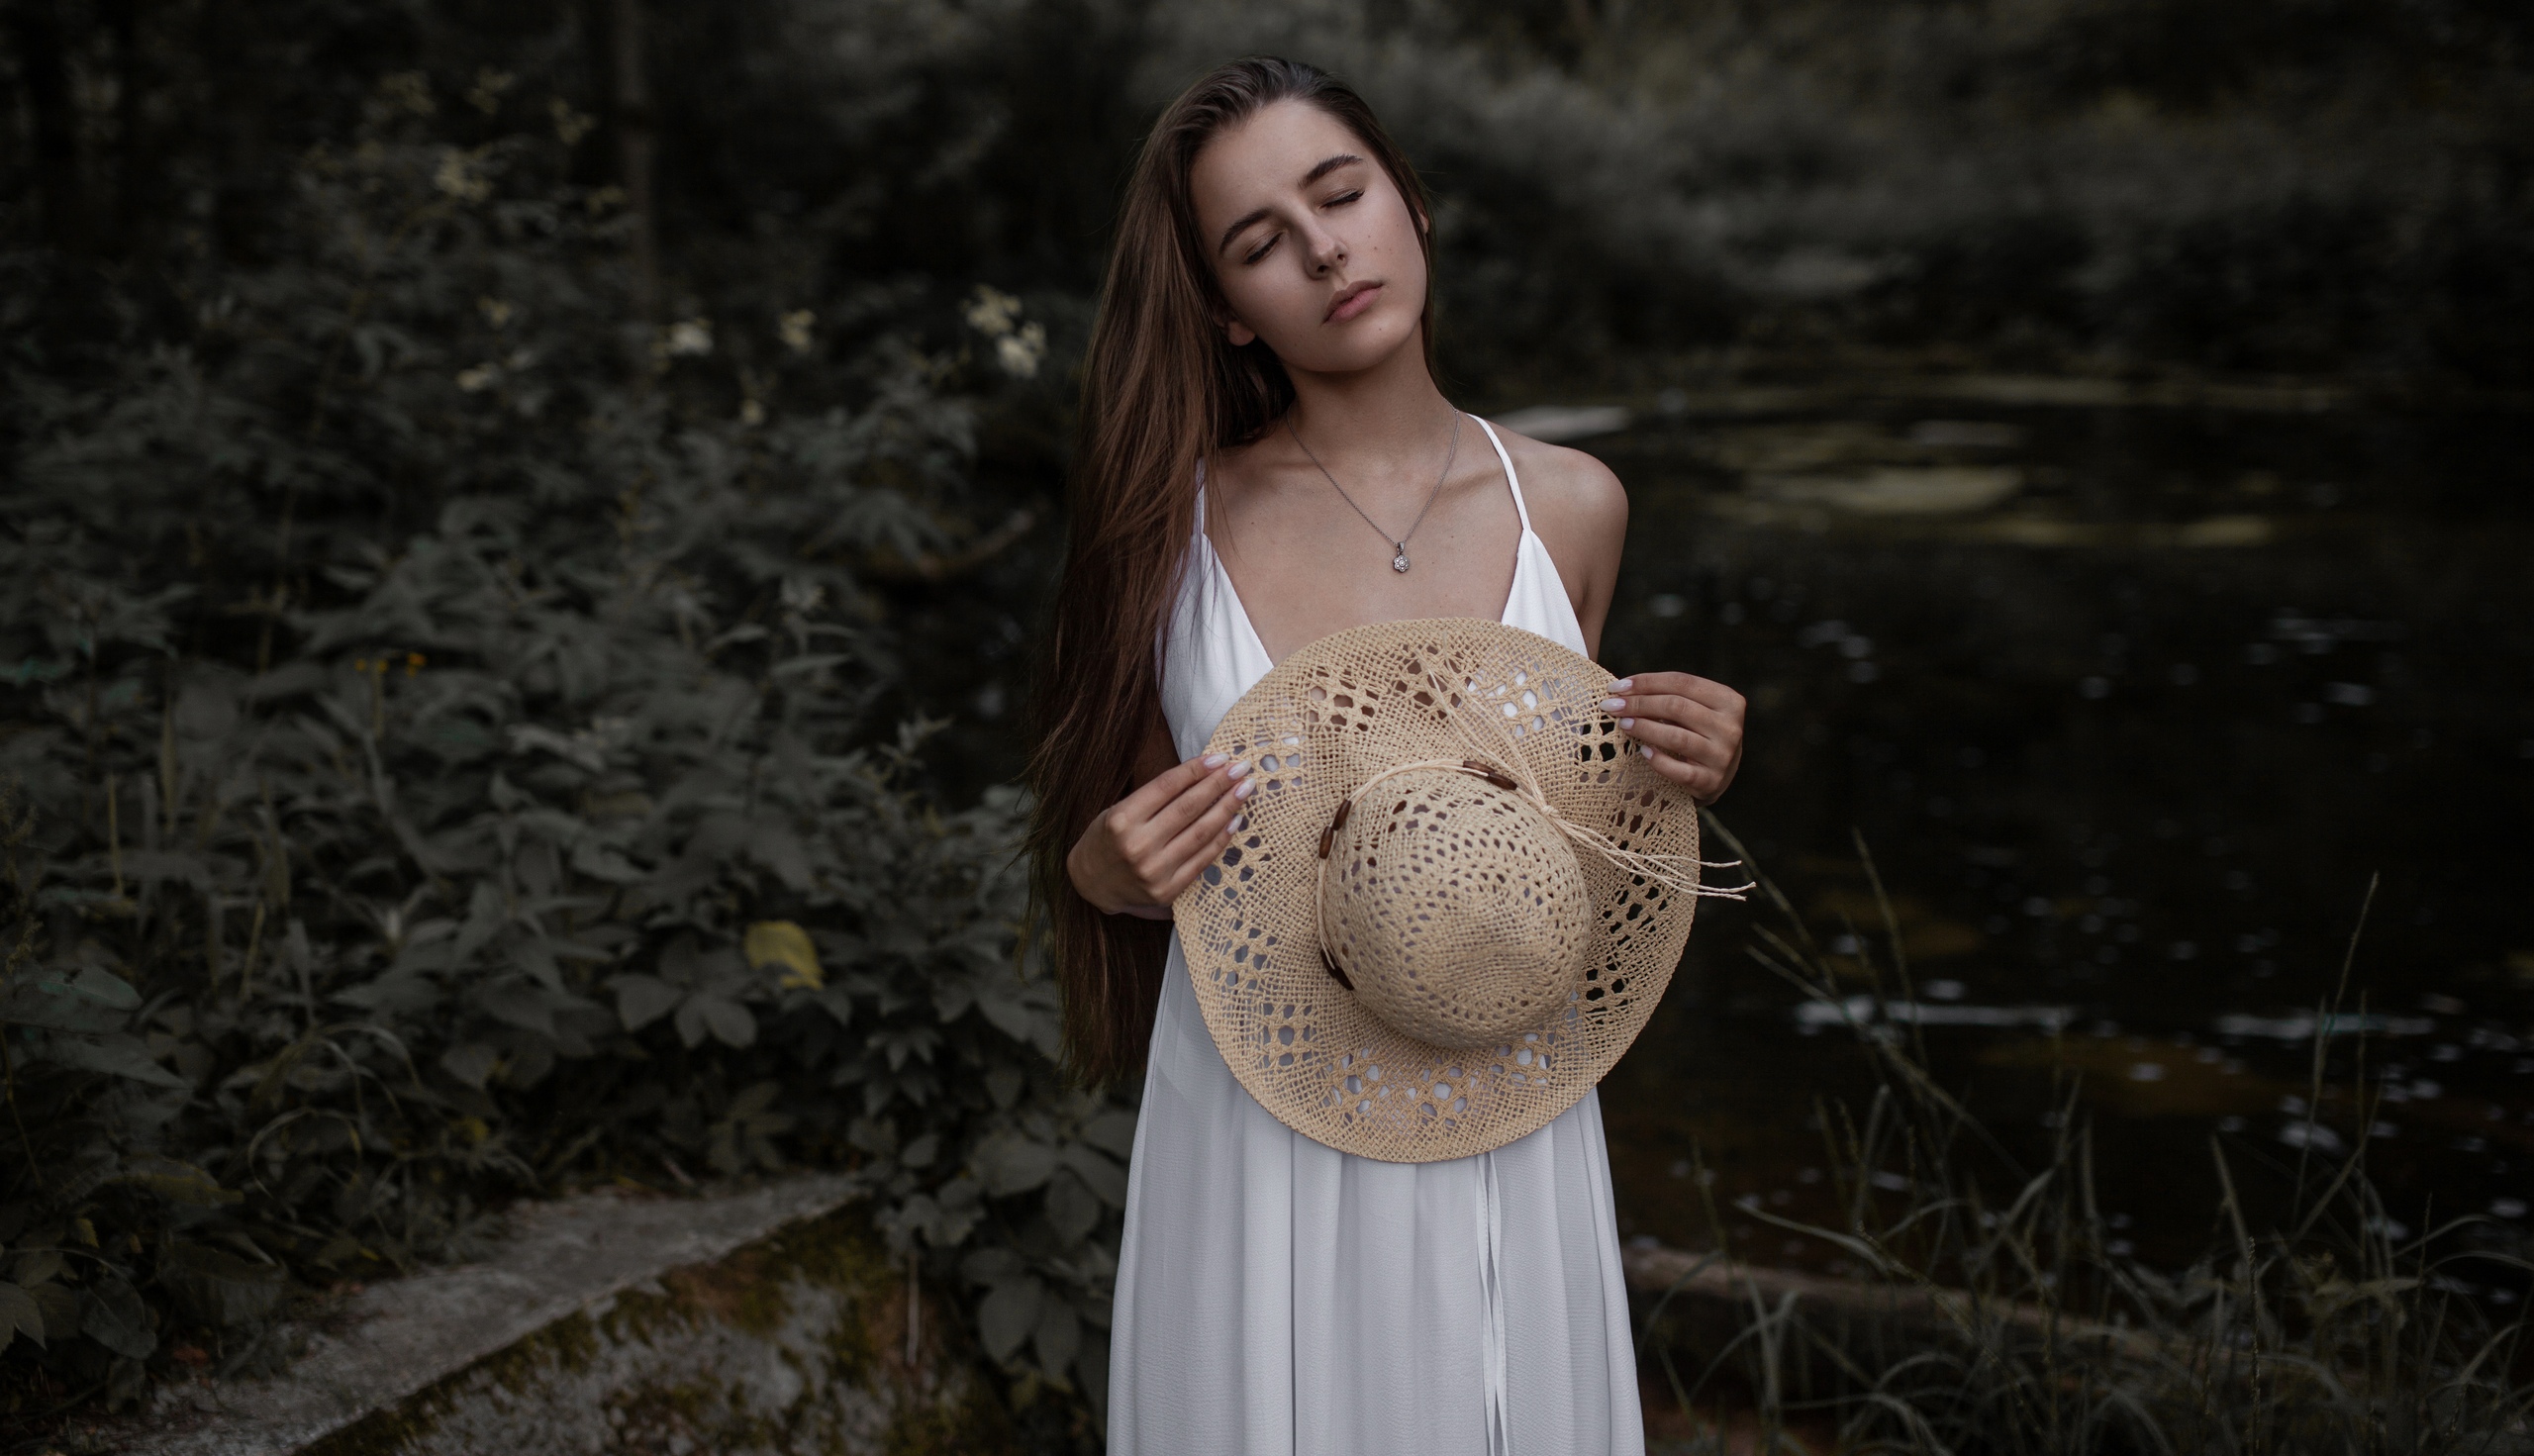 People 2560x1471 women model brunette long hair hat cleavage necklace dress white dress forest outdoors women outdoors closed eyes portrait depth of field painted nails Andrey Frolov no bra Tatiana Vanyasheva